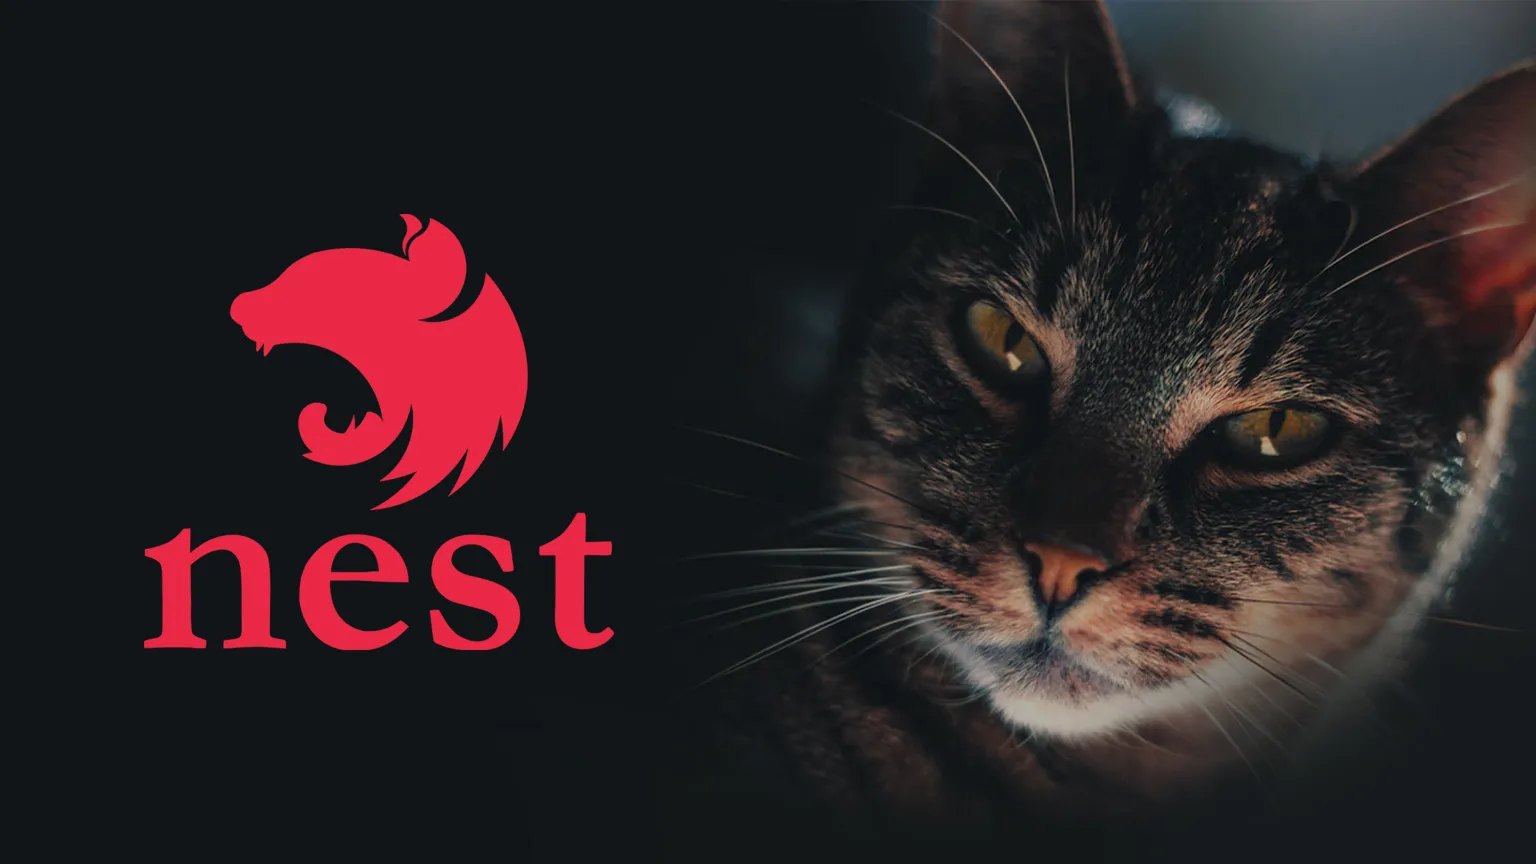 NestJS' logo with a cat in the background